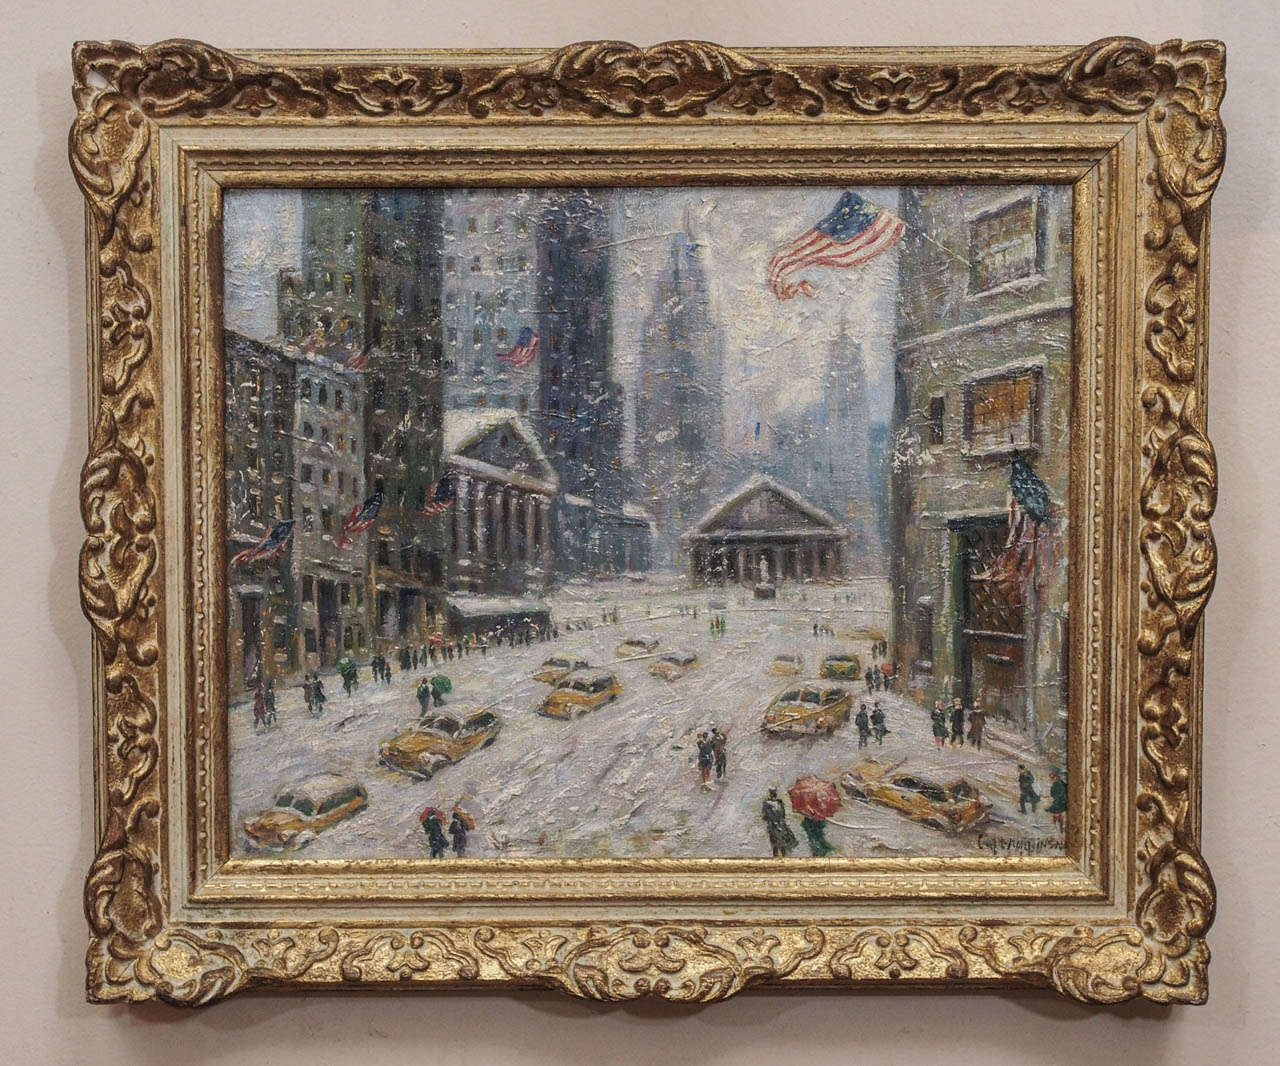 Guy Carleton Wiggins (February 23, 1883 – April 1962) was an American artist, who became famous for his paintings of New York City during the winter,  painting the snowy streets, landmarks and towering skyscrapers. “Winter on Wall Street” depicts a